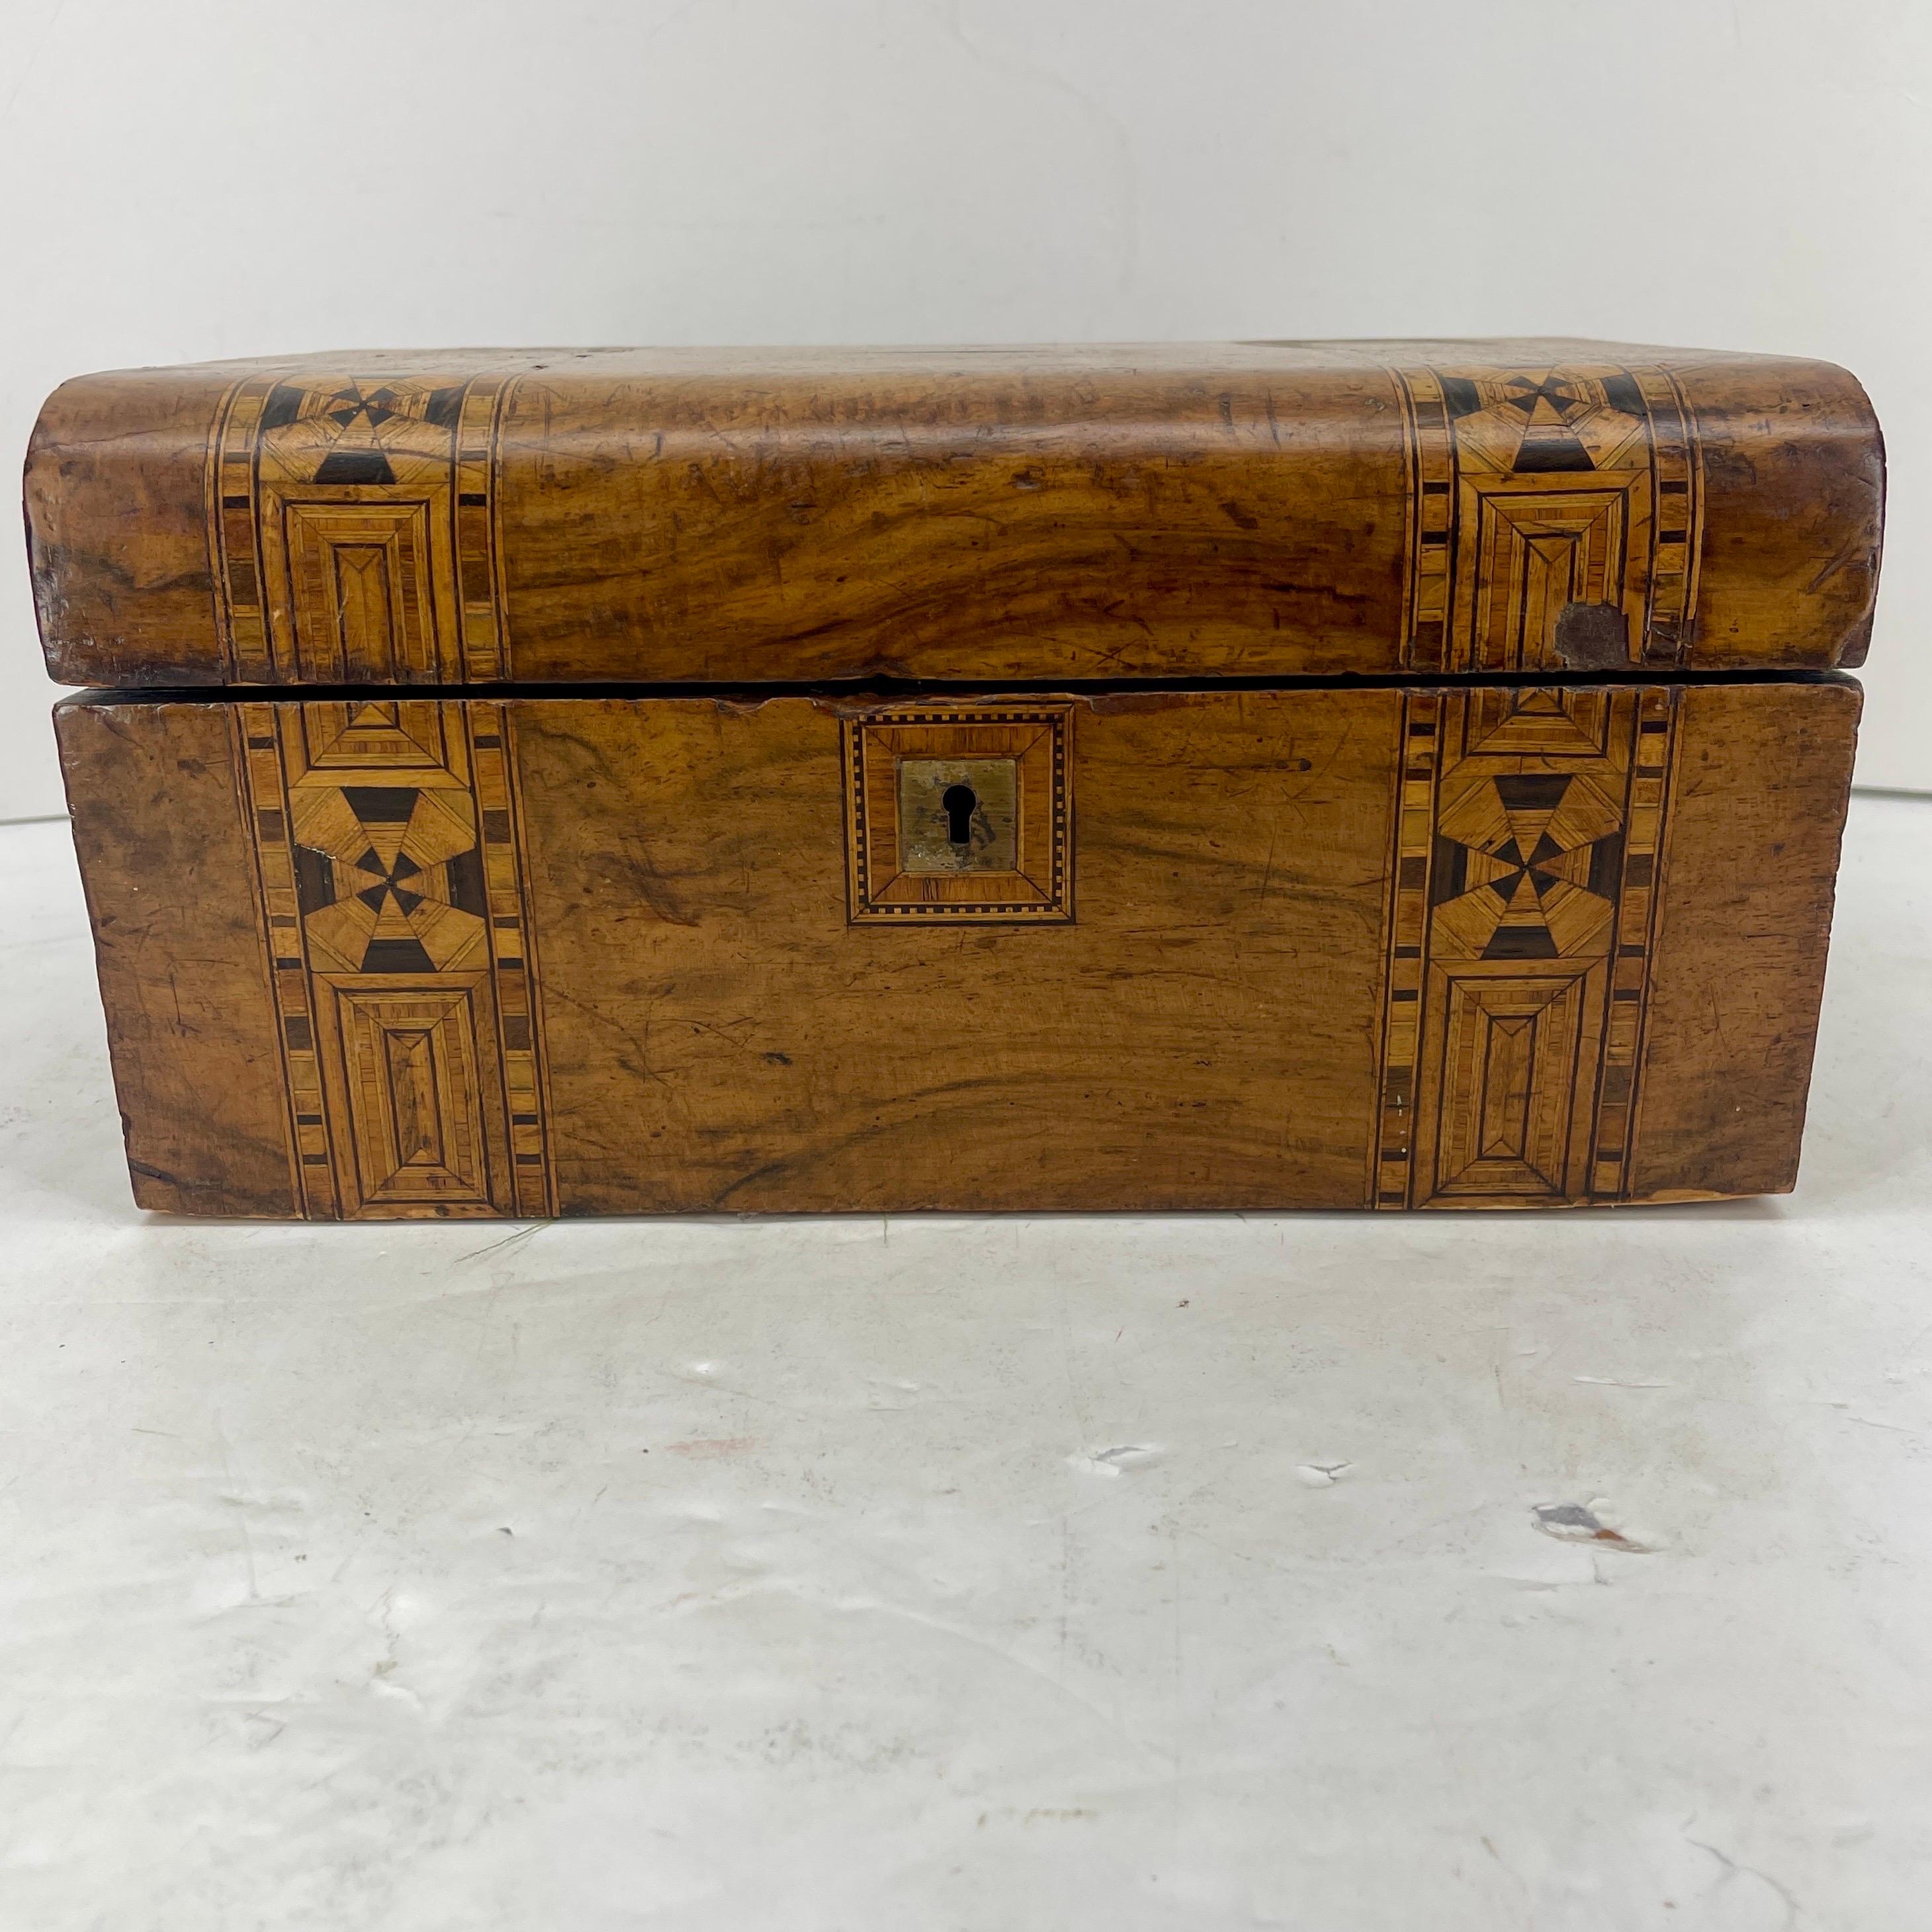 Swedish Inlaid Fruitwood and Veneered Box with Curved Top Early 19th Century For Sale 3